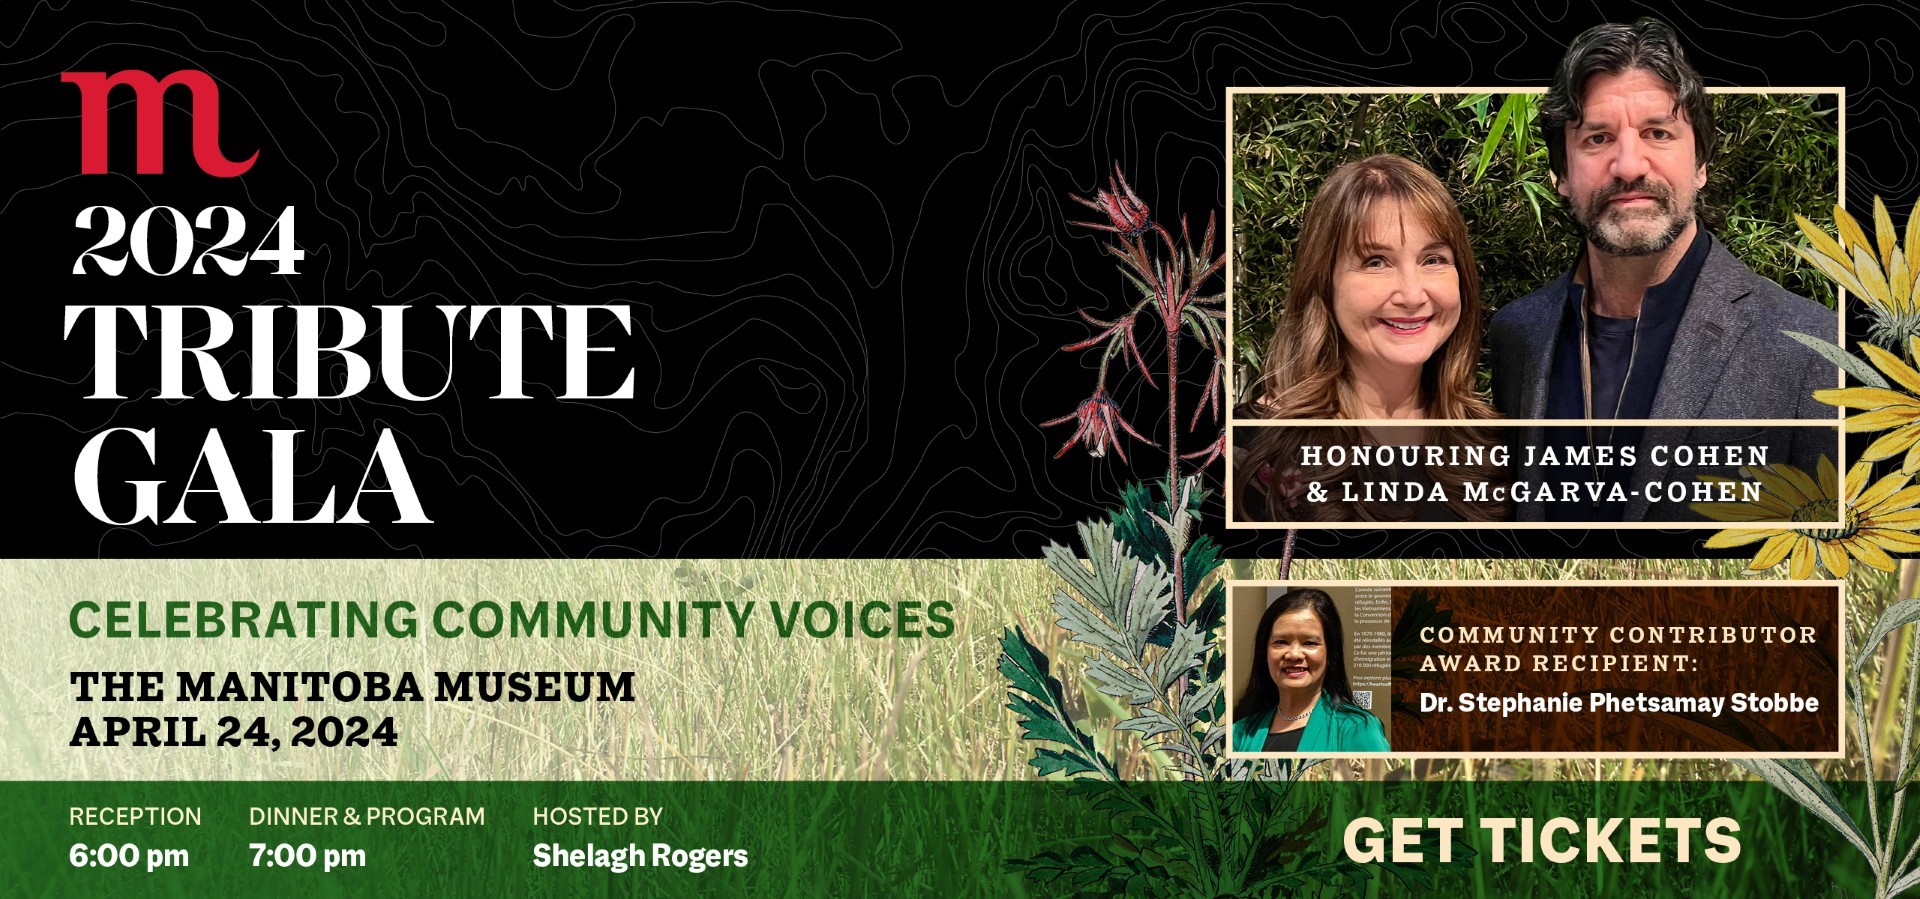 Promotional graphic for the Manitoba Museum's 2024 Tribute Gala. On the upper right is a photograph of honourees James Cohen and Linda McGarva-Cohen. Below is a photograph of Community Contributor Award Recipient Dr. Stephanie Phetsamay Stobbe. On the left, text reads, 